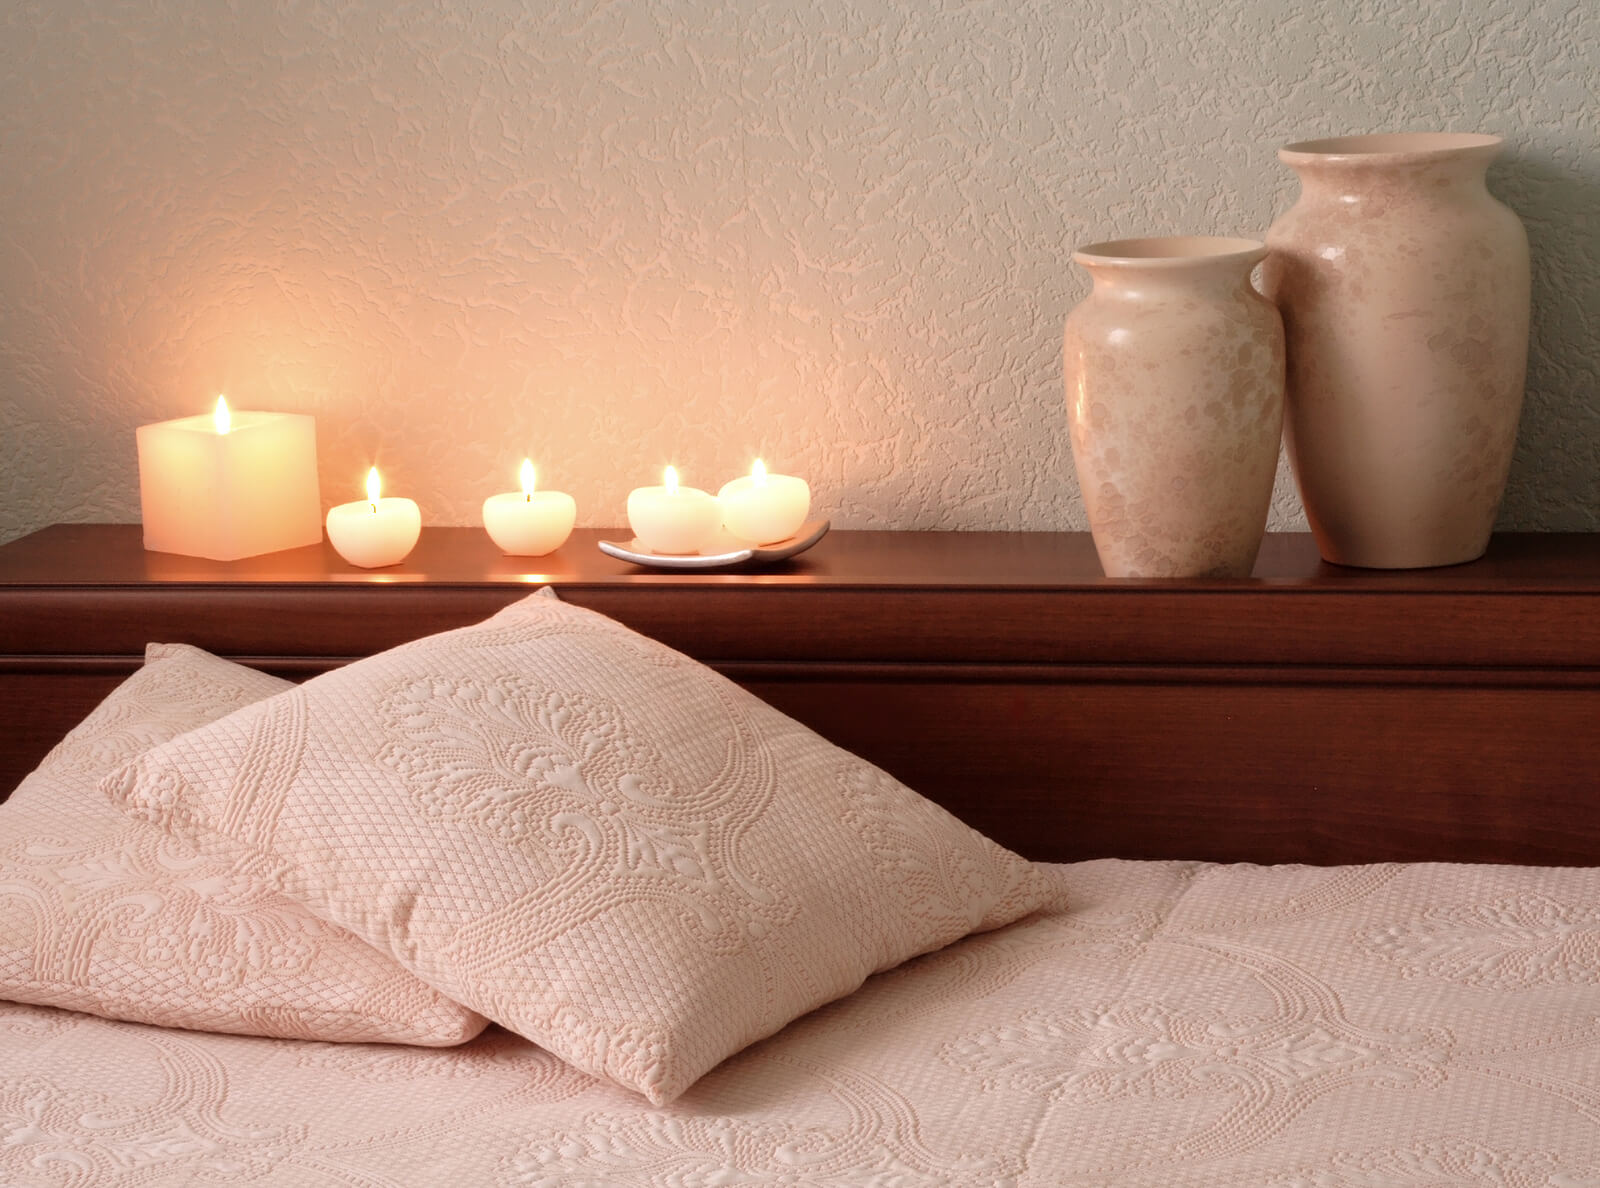 A set of candles and vases around a bed with pillows. Are you looking to explore yourself? Depth therapy in Austin, TX could be right for you. Speak with an online psychotherapist in Texas today. 